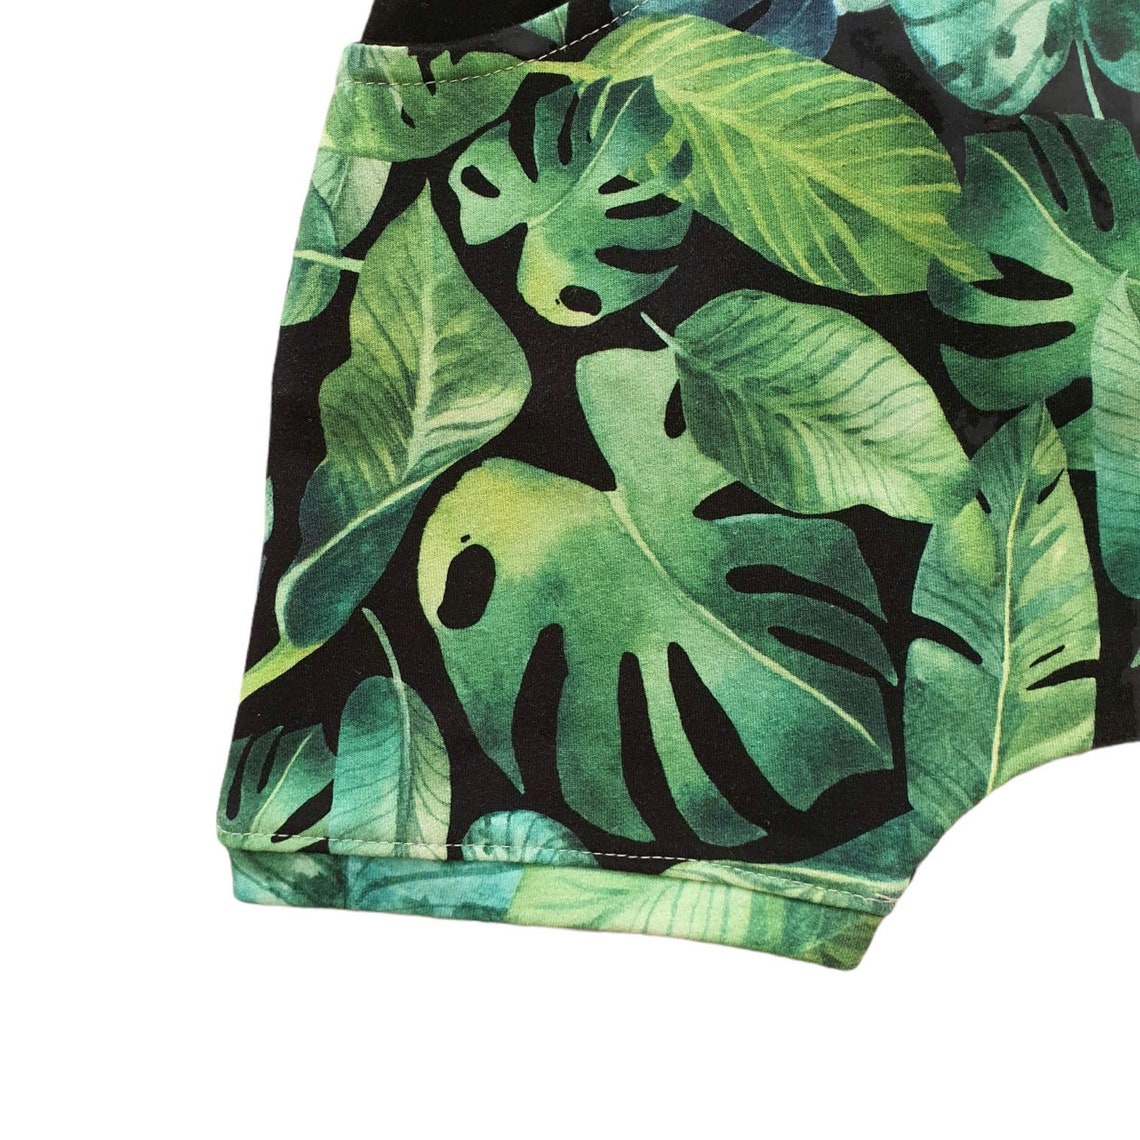 Shorts with pockets type MONSTERA in sweatshirts | Etsy